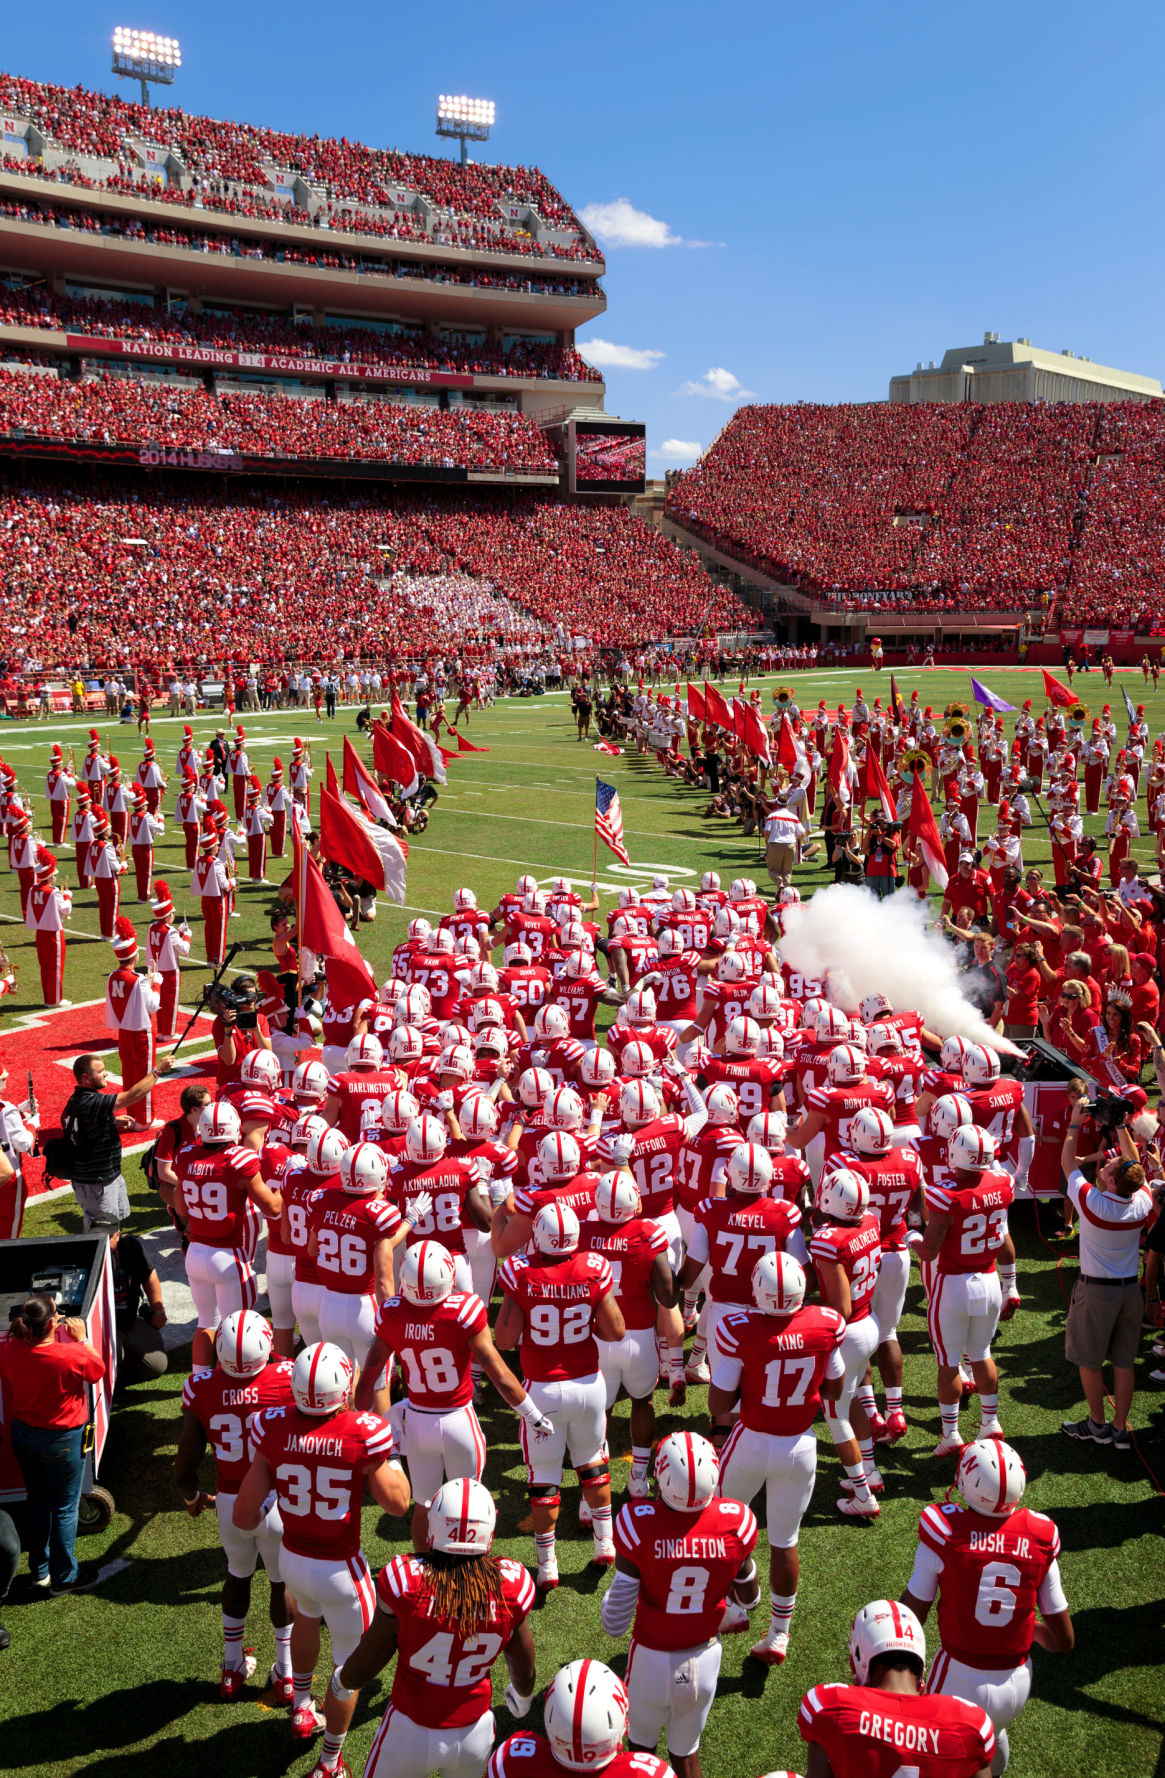 Chatelain Husker game day in Lincoln will be an experience unlike any